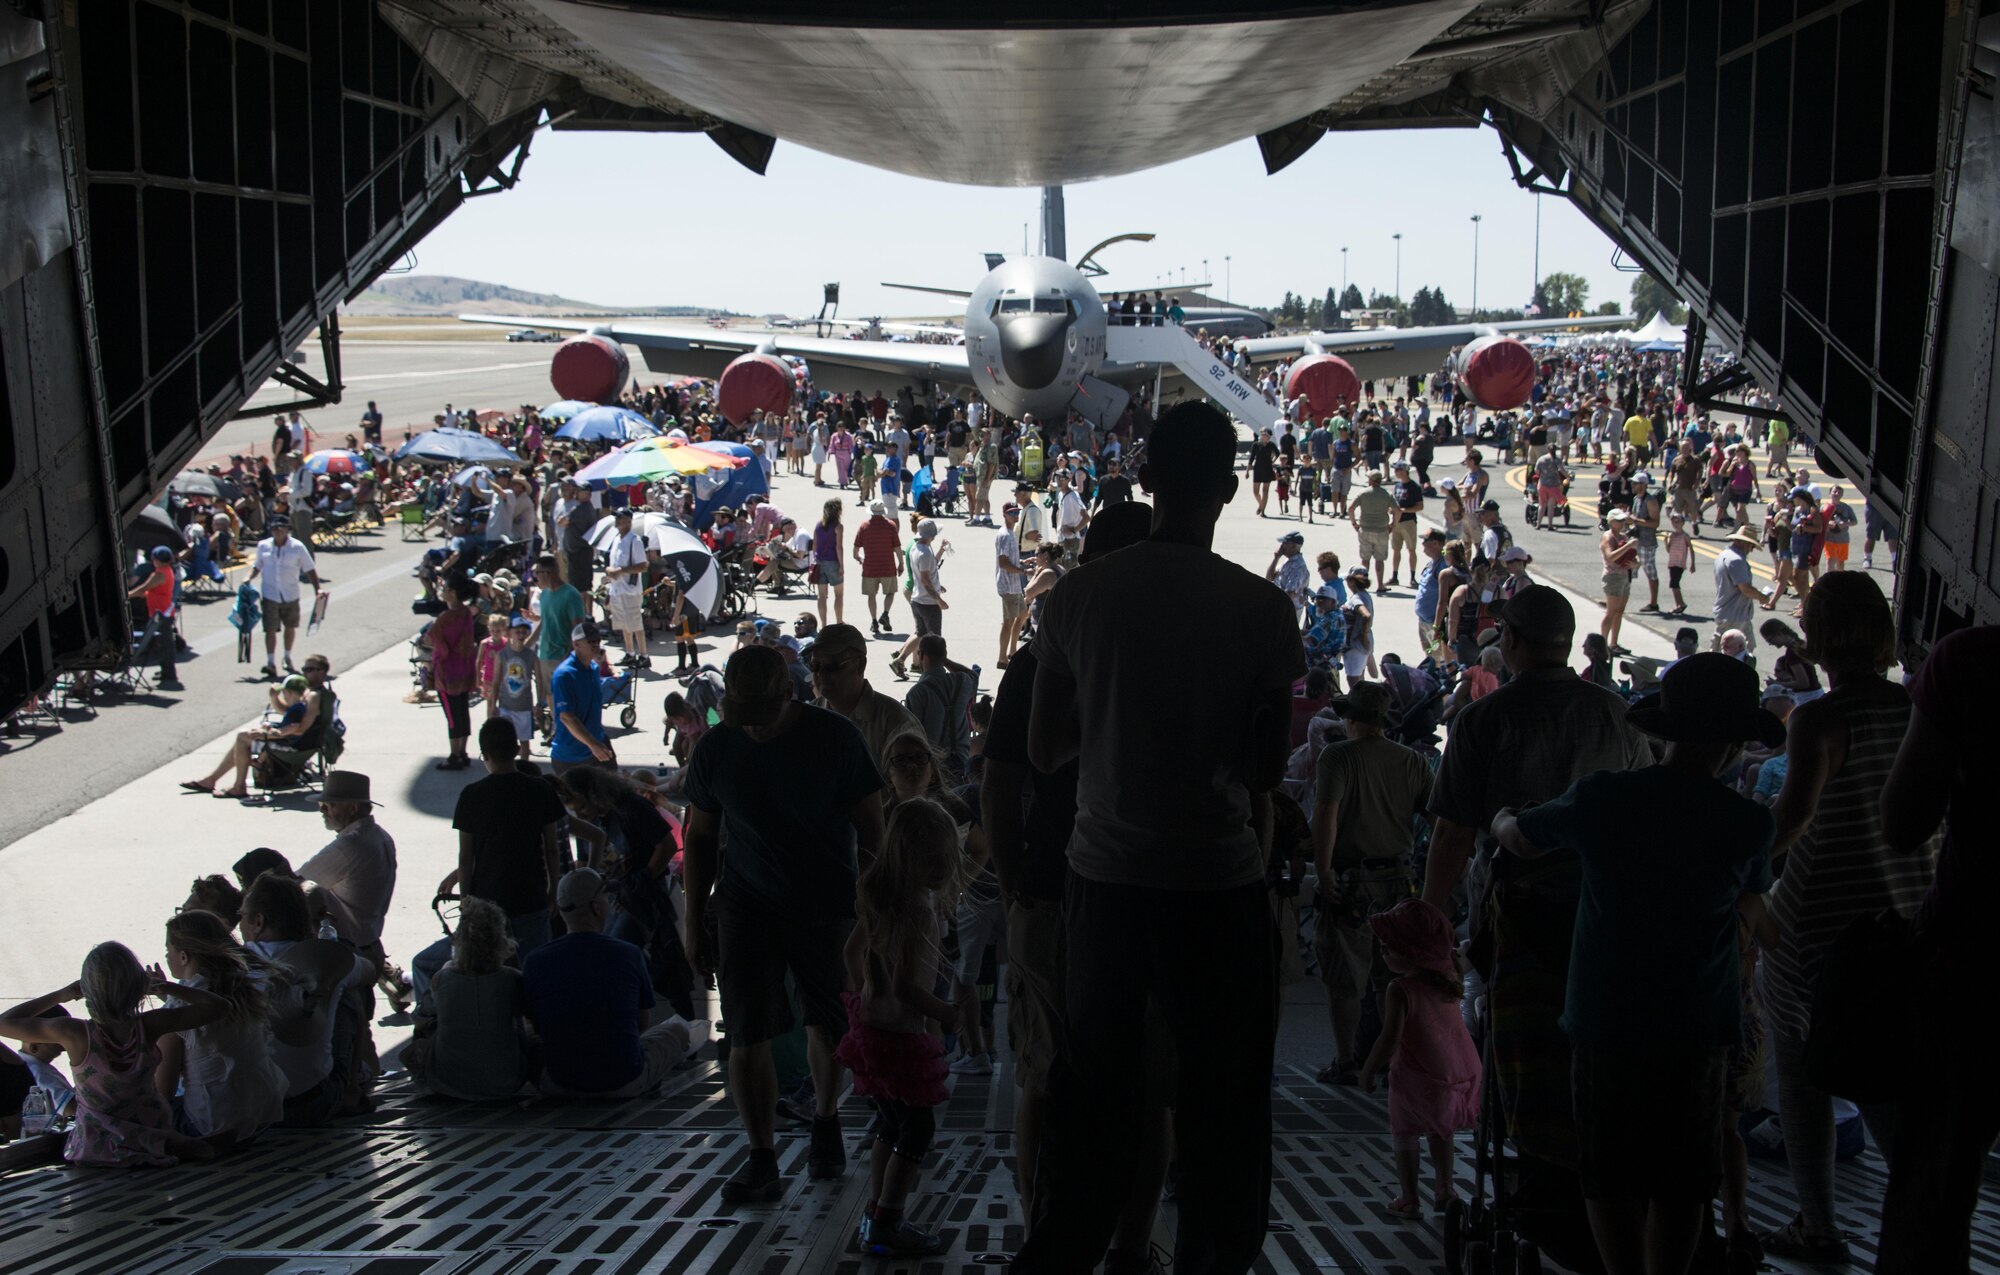 Service members and members from the local community walk off a C-5 Galaxy during SkyFest 2017 Air Show and Open House at Fairchild Air Force Base, Washington, July 29, 2017. SkyFest is Fairchild’s air show and open house to give the local and regional community the opportunity to meet Airmen and learn about the Air Force mission. (U.S. Air Force photo/Senior Airman Janelle Patiño)